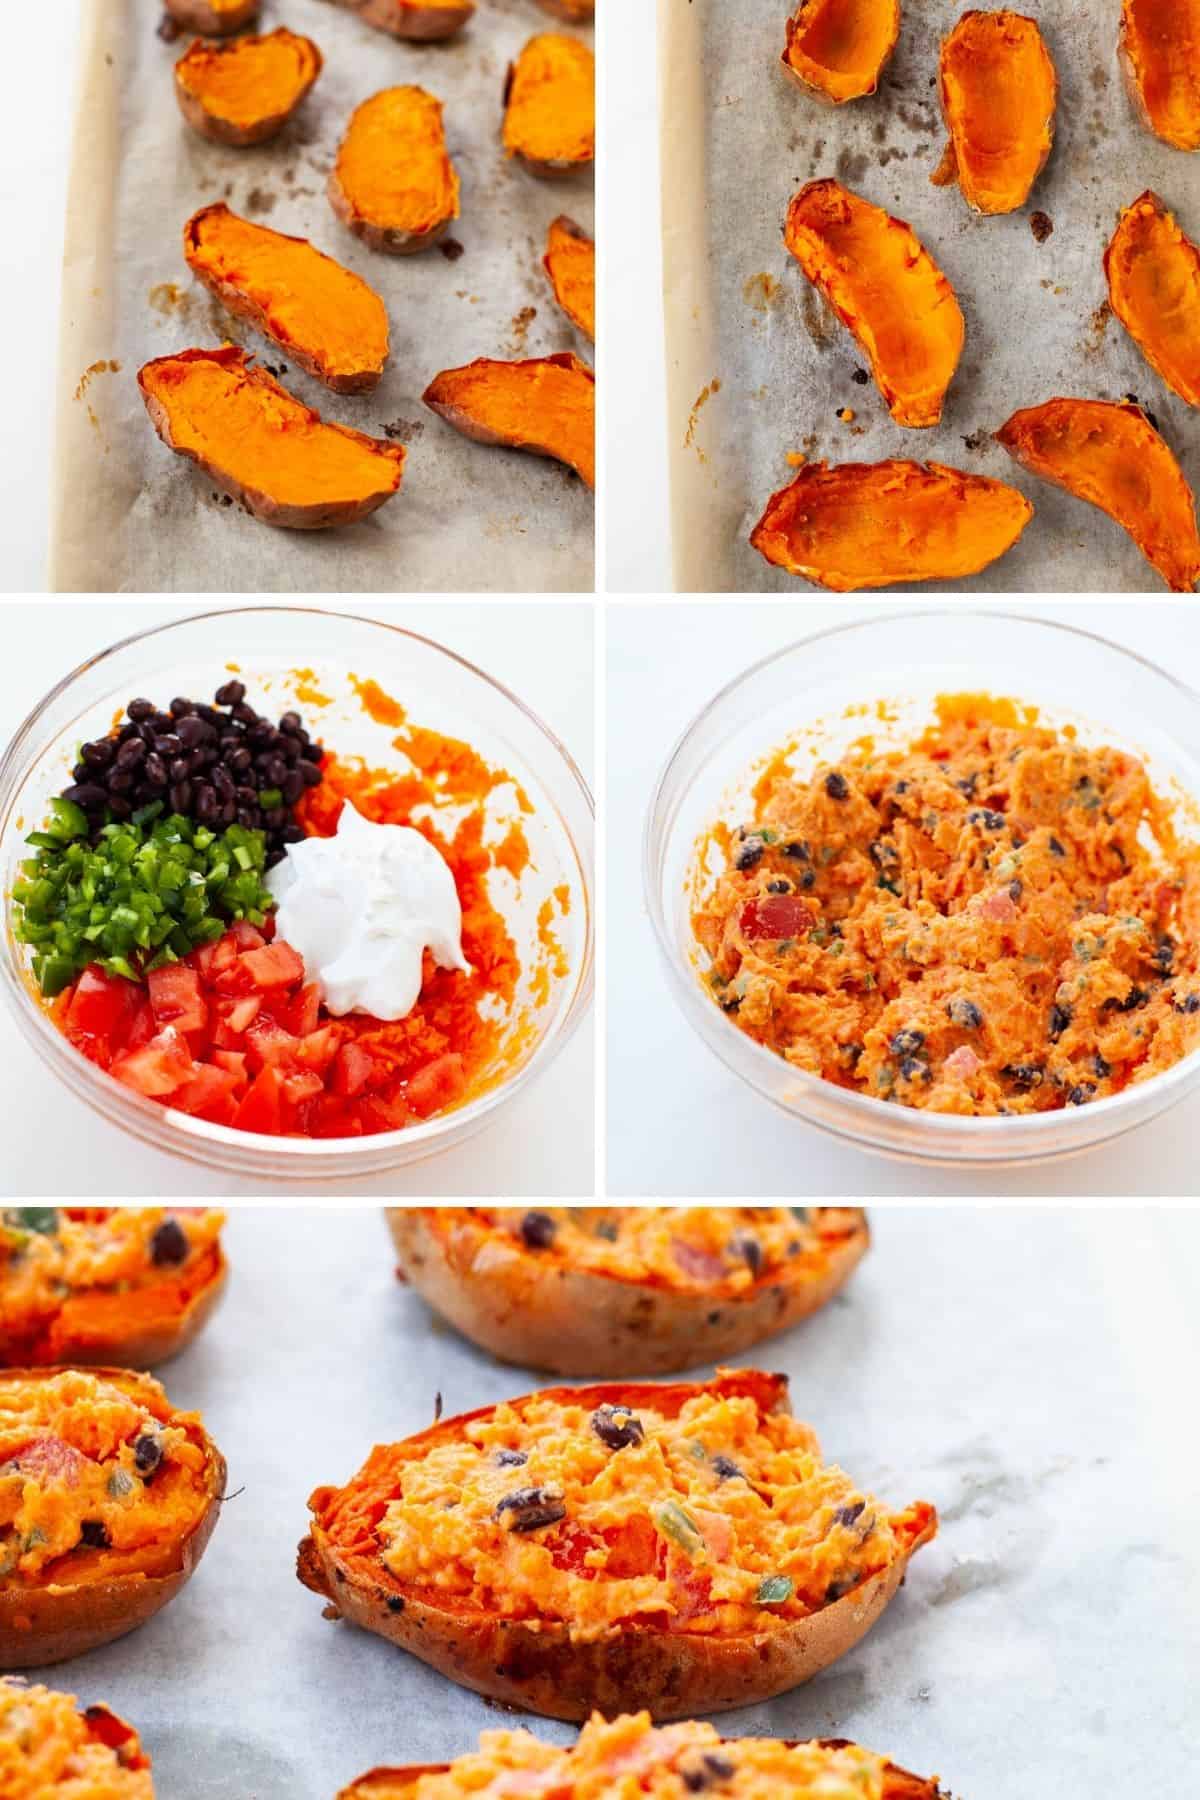 Baked sweet potatoes on sheet pan. Black beans, jalapeño, diced tomato, and mixed together in bowl.